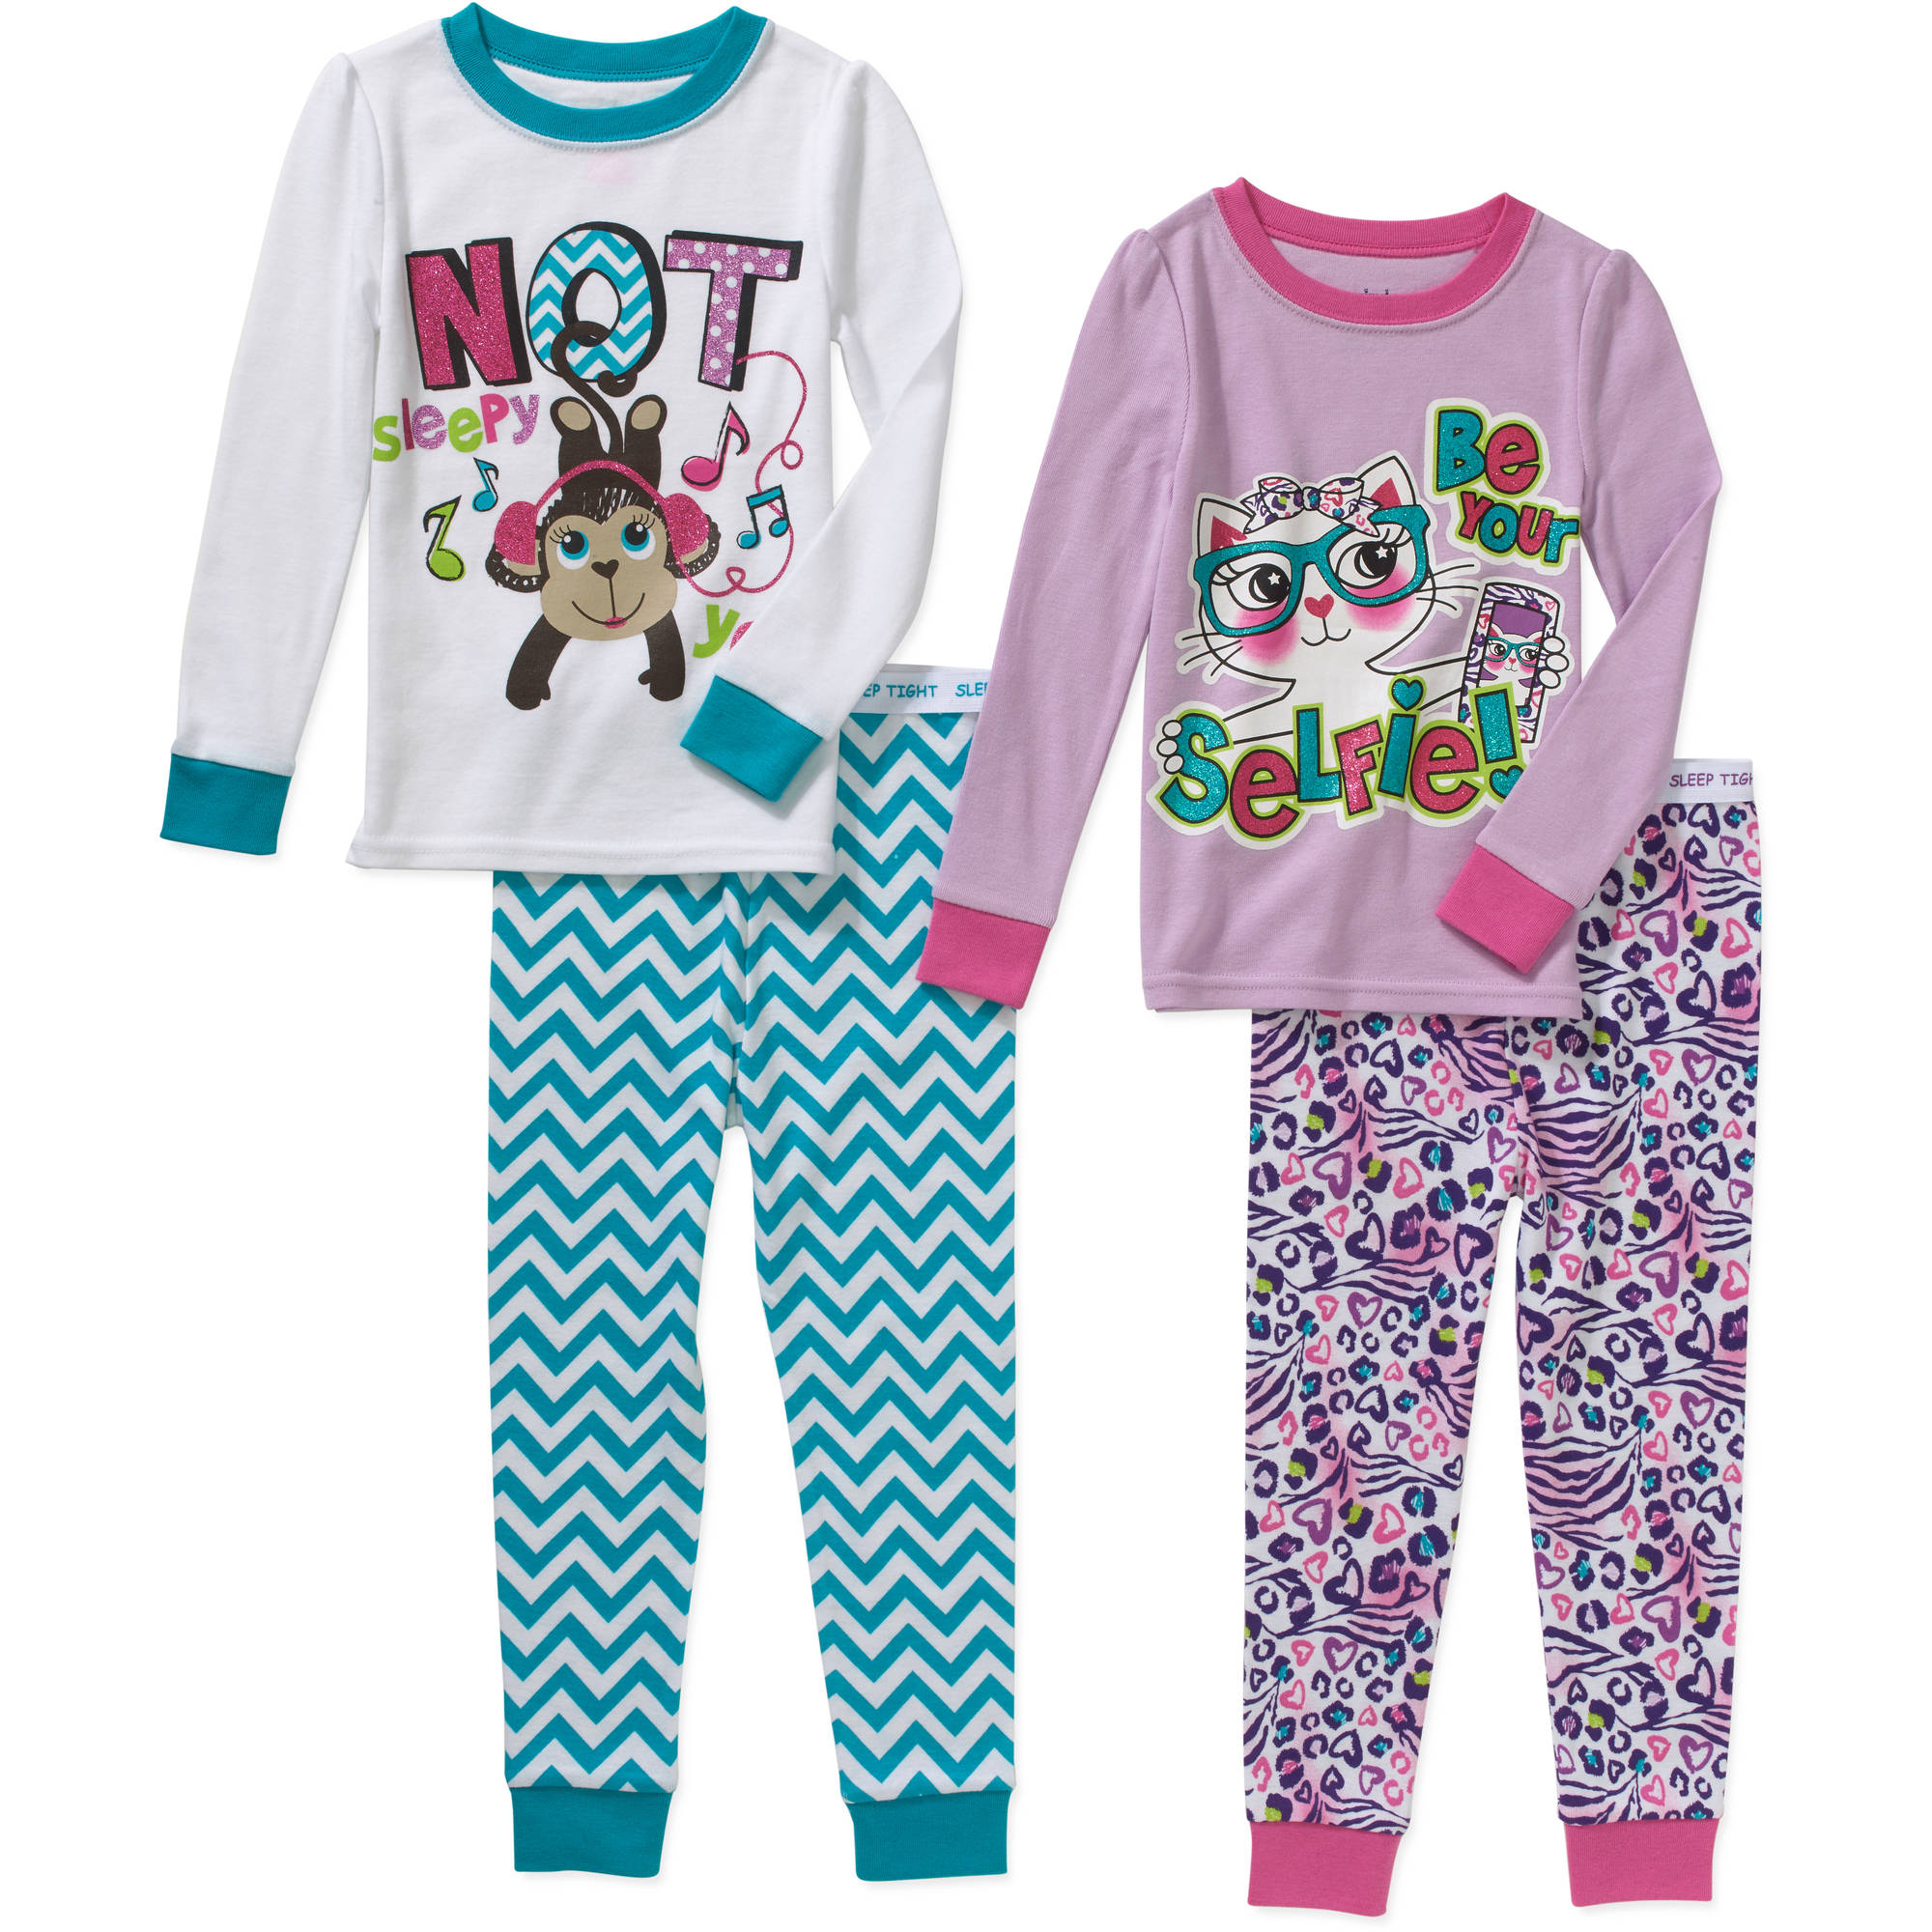 Baby Toddler Girl Cotton Tight Fit Pajamas, 2-Sets - image 1 of 1